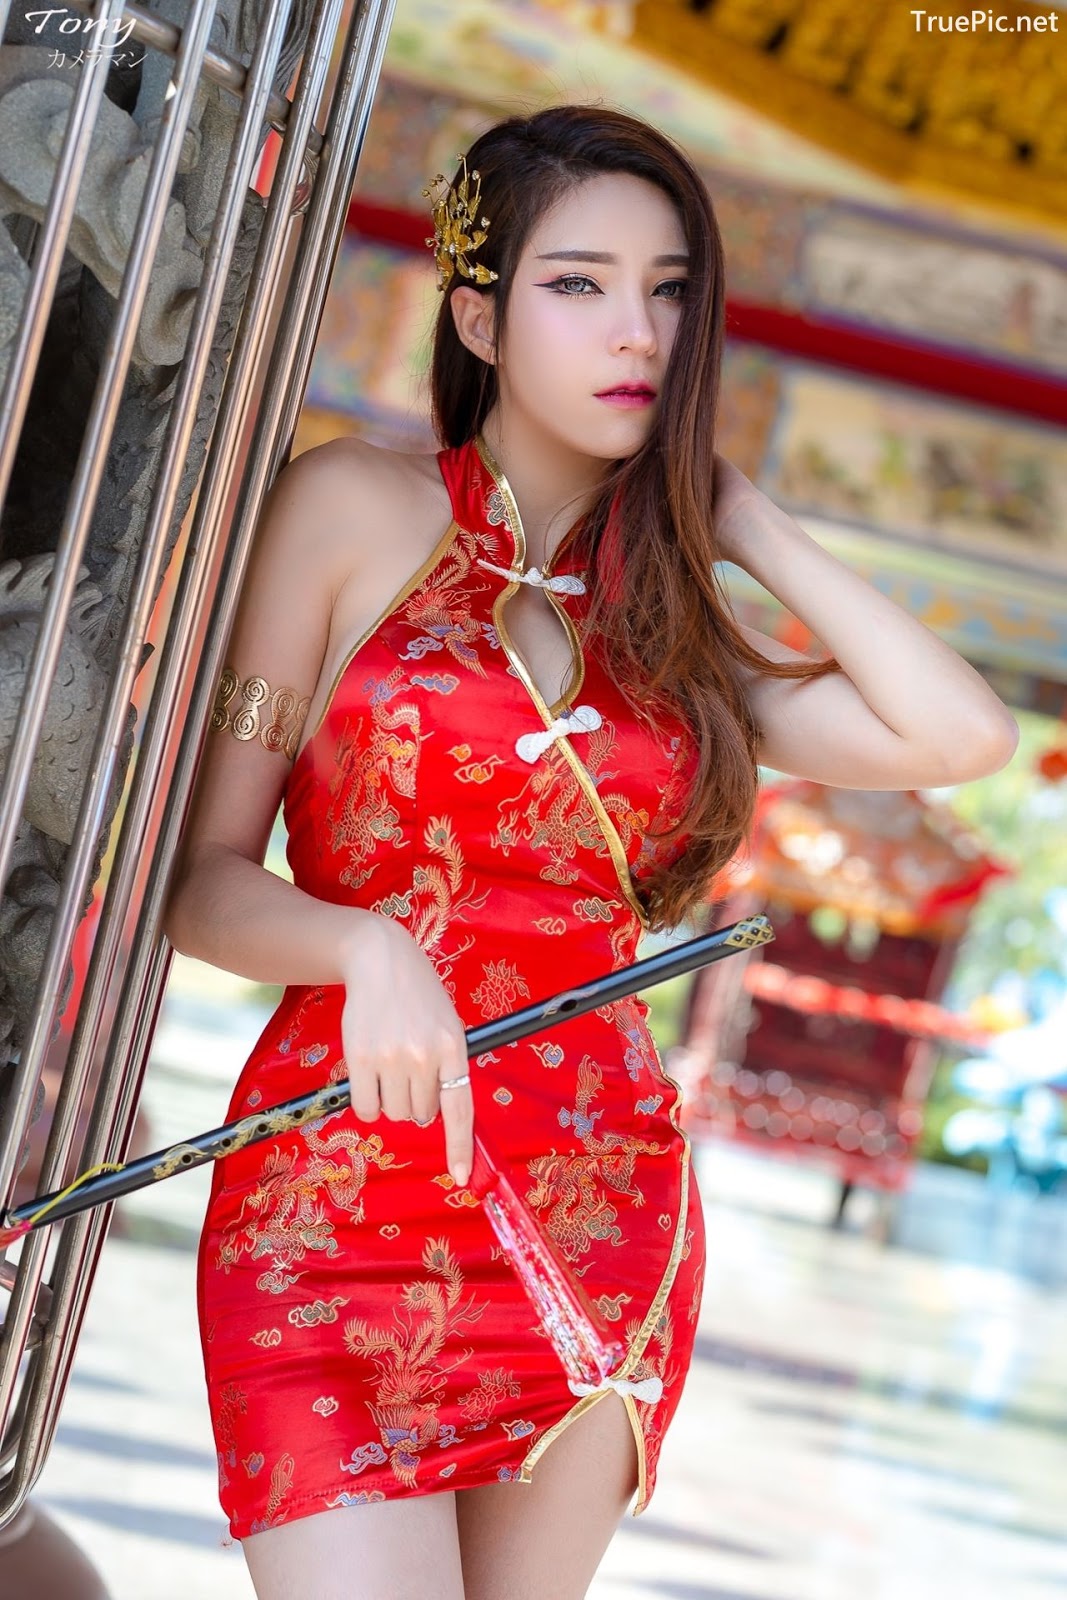 Image-Thailand-Hot-Model-Janet-Kanokwan-Saesim-Sexy-Chinese-Girl-Red-Dress-Traditional-TruePic.net- Picture-17